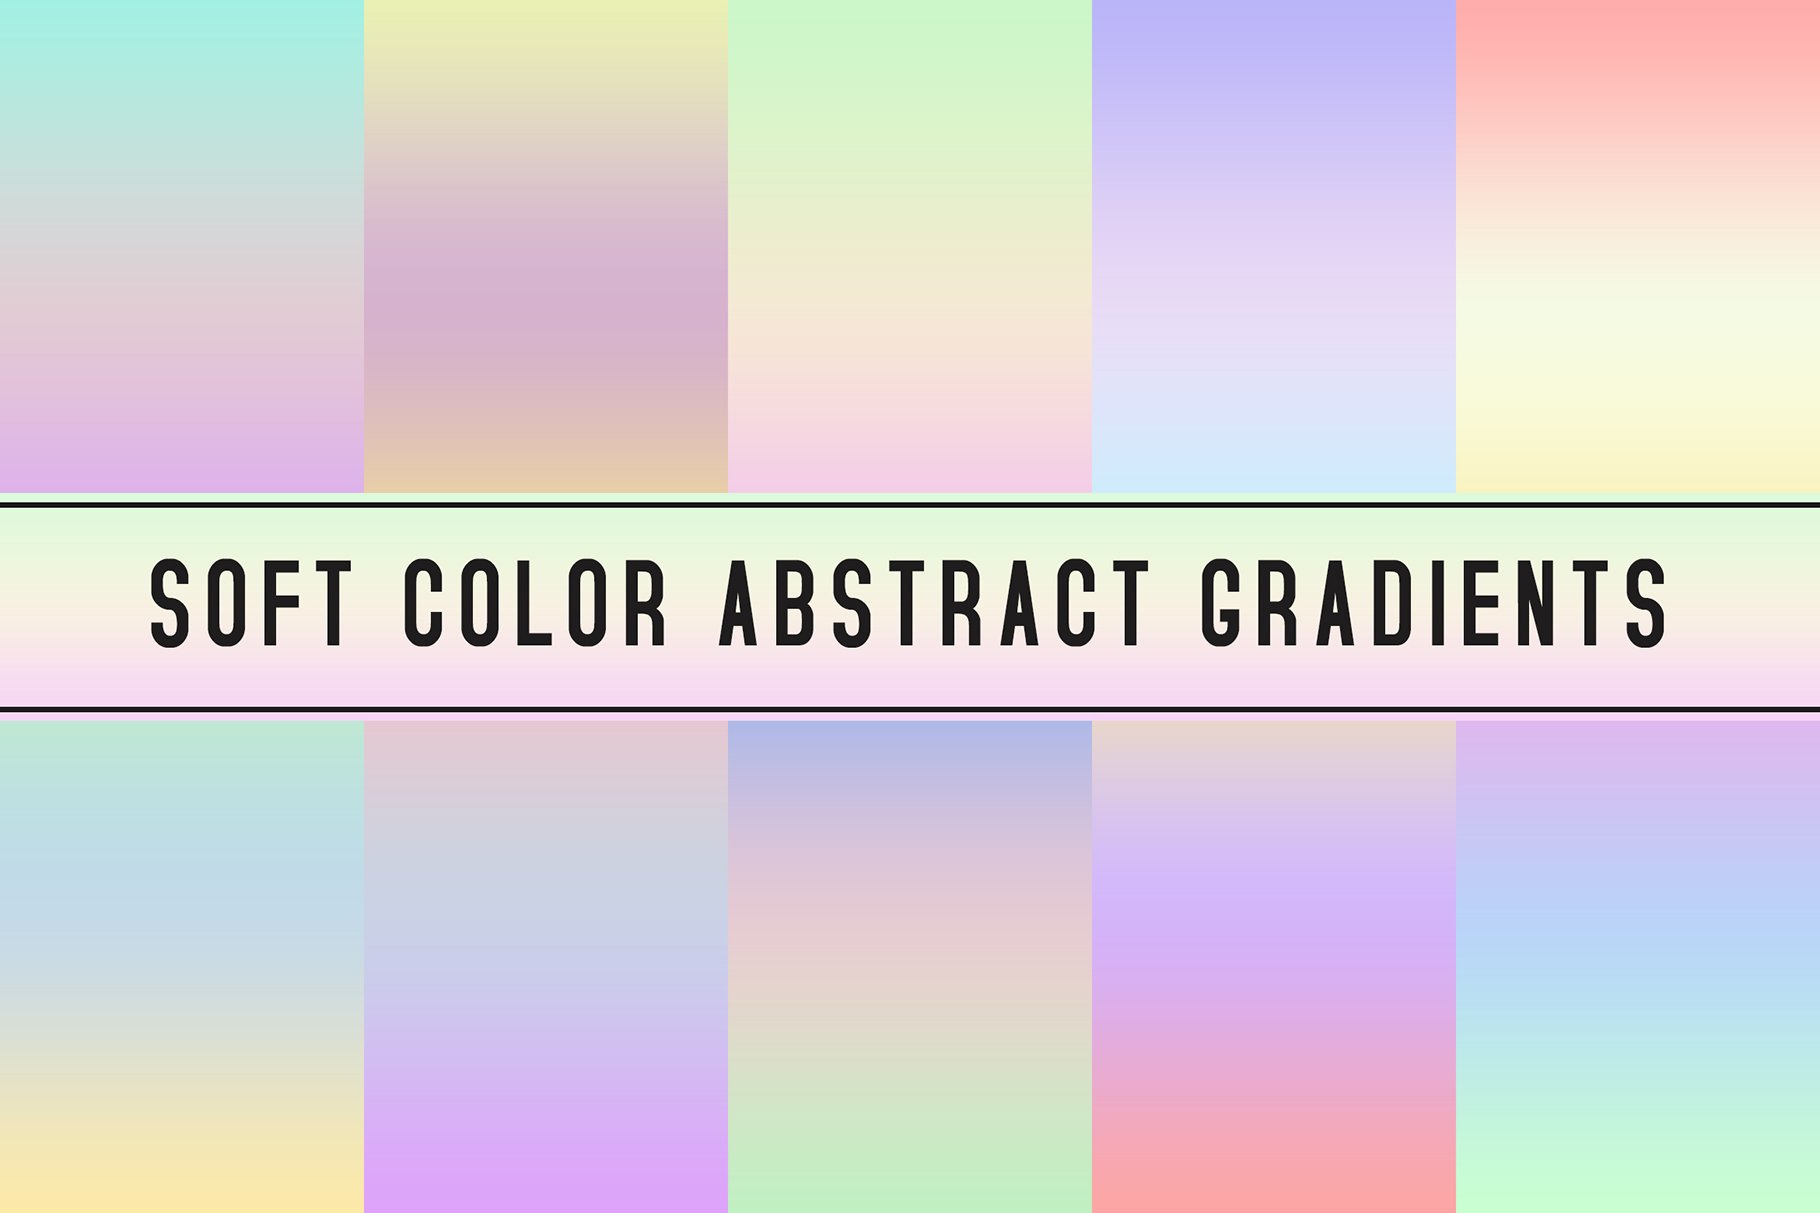 Soft Color Abstract Gradients cover image.